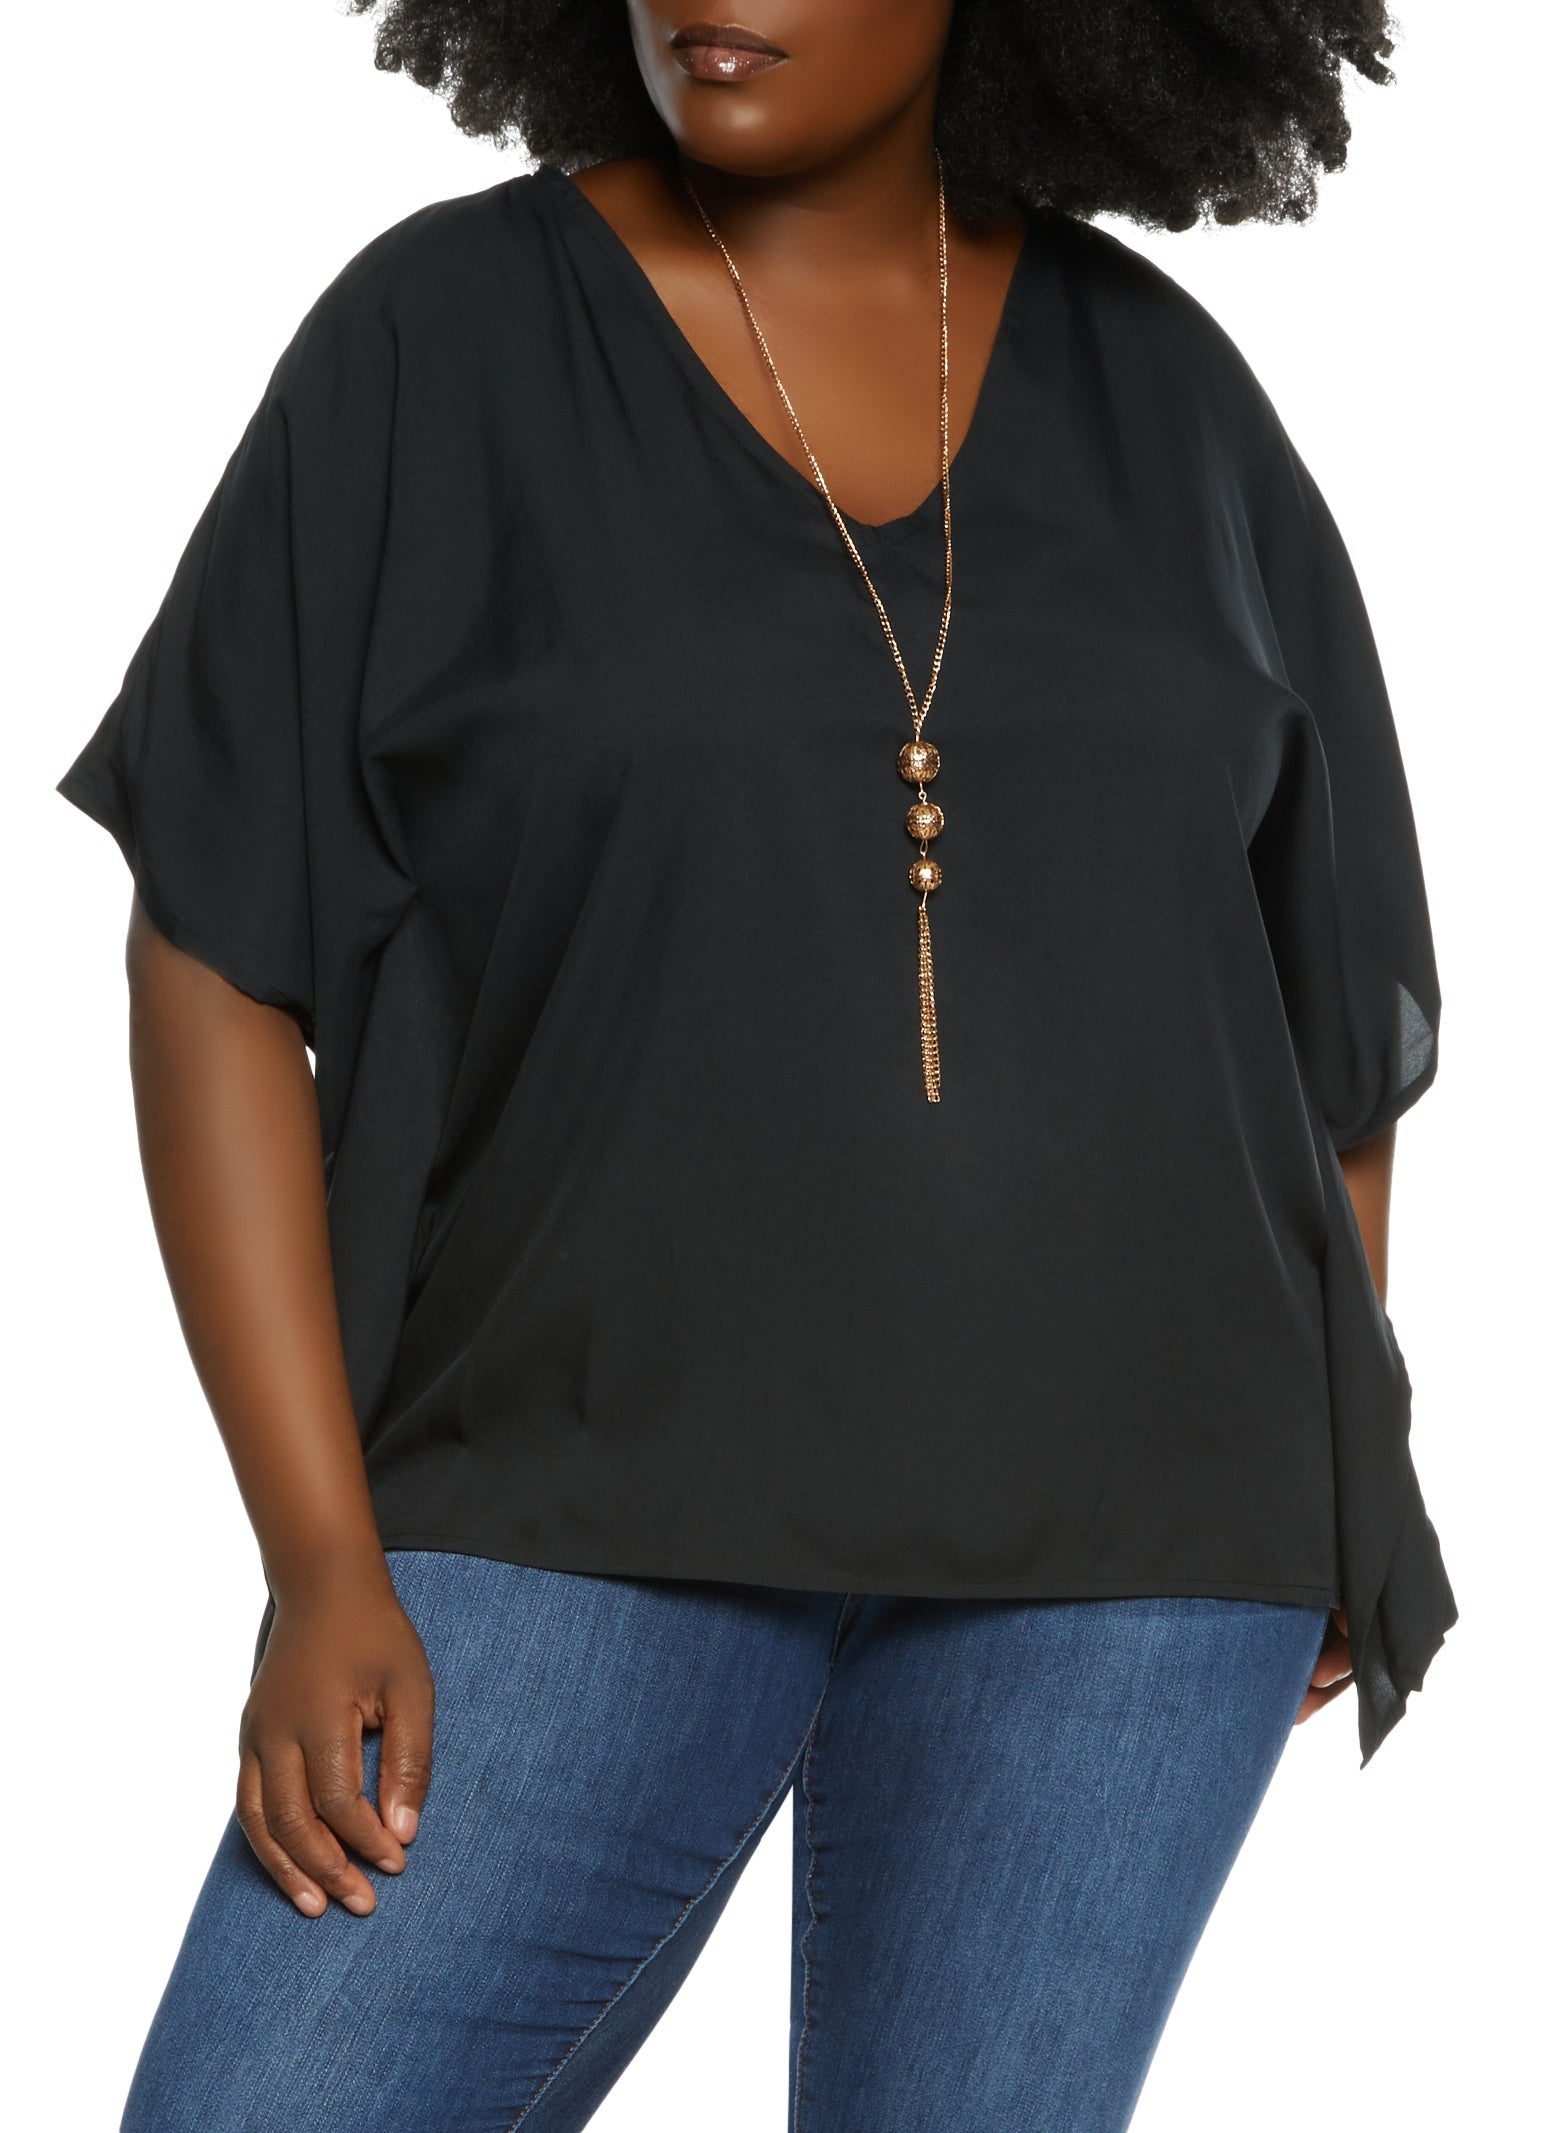 Plus Size Solid Poncho with Necklace